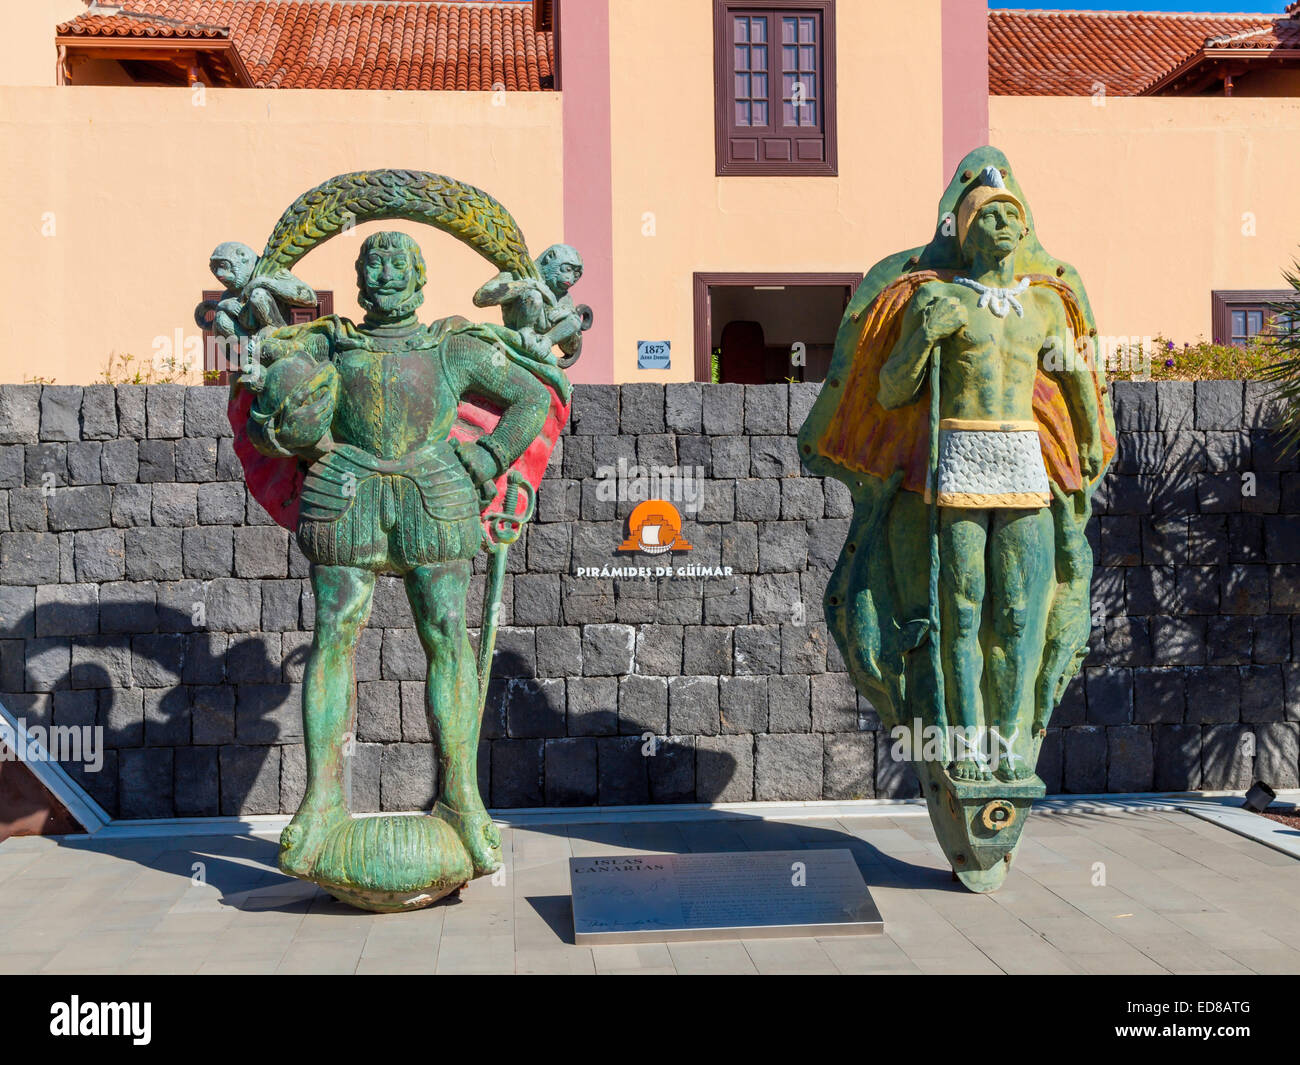 Statues representing the Spanish conquerors and the conquered stone age Guanaches at the Piramides de Guimar Ethnographic Park Stock Photo